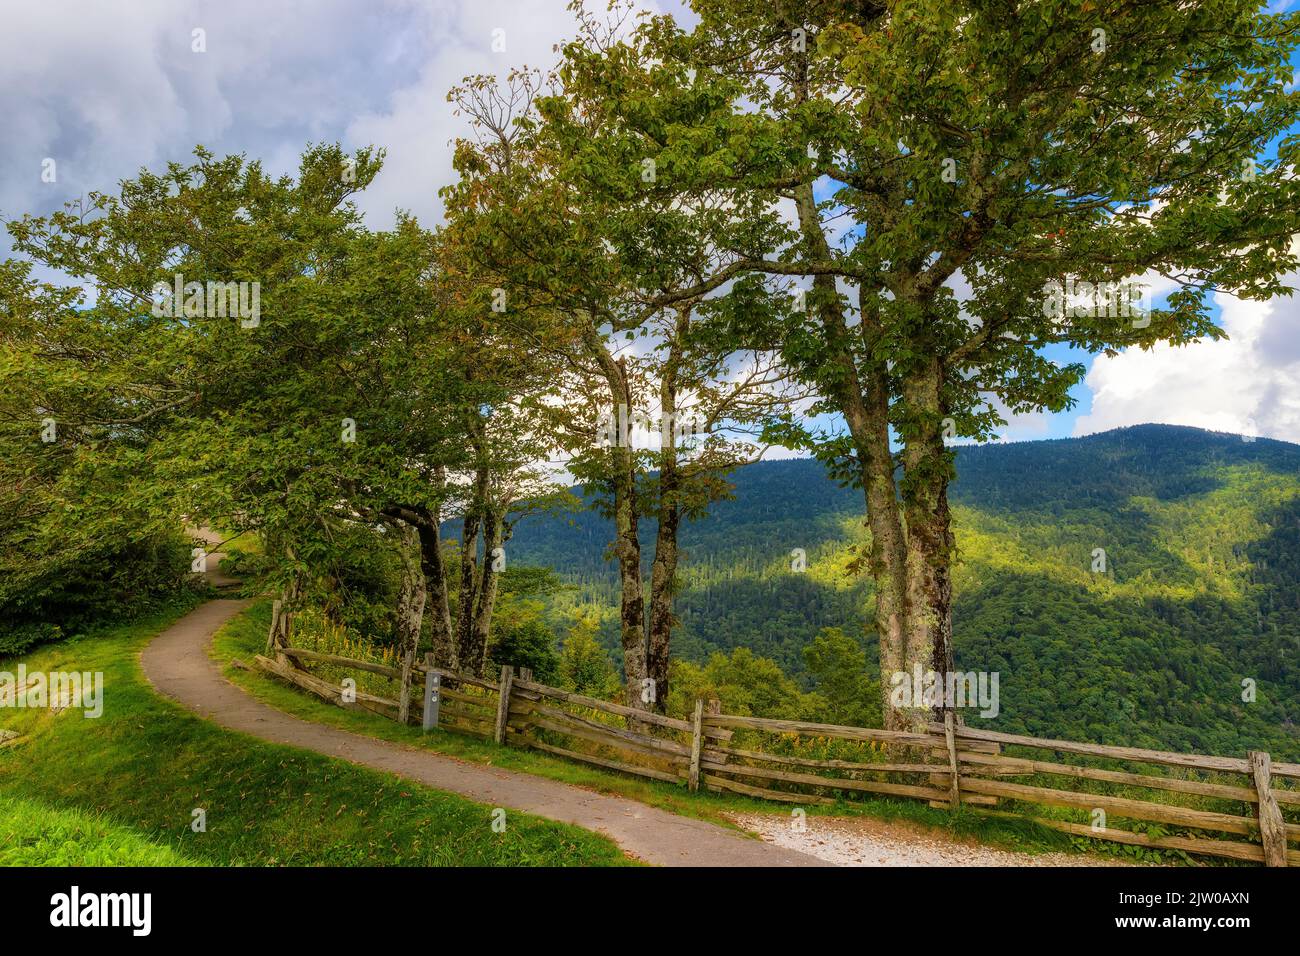 Scenic breath taking views of the Blue Ridge Mountains as one travels the Blue Ridge Parkway in North Carolina, USA. Stock Photo